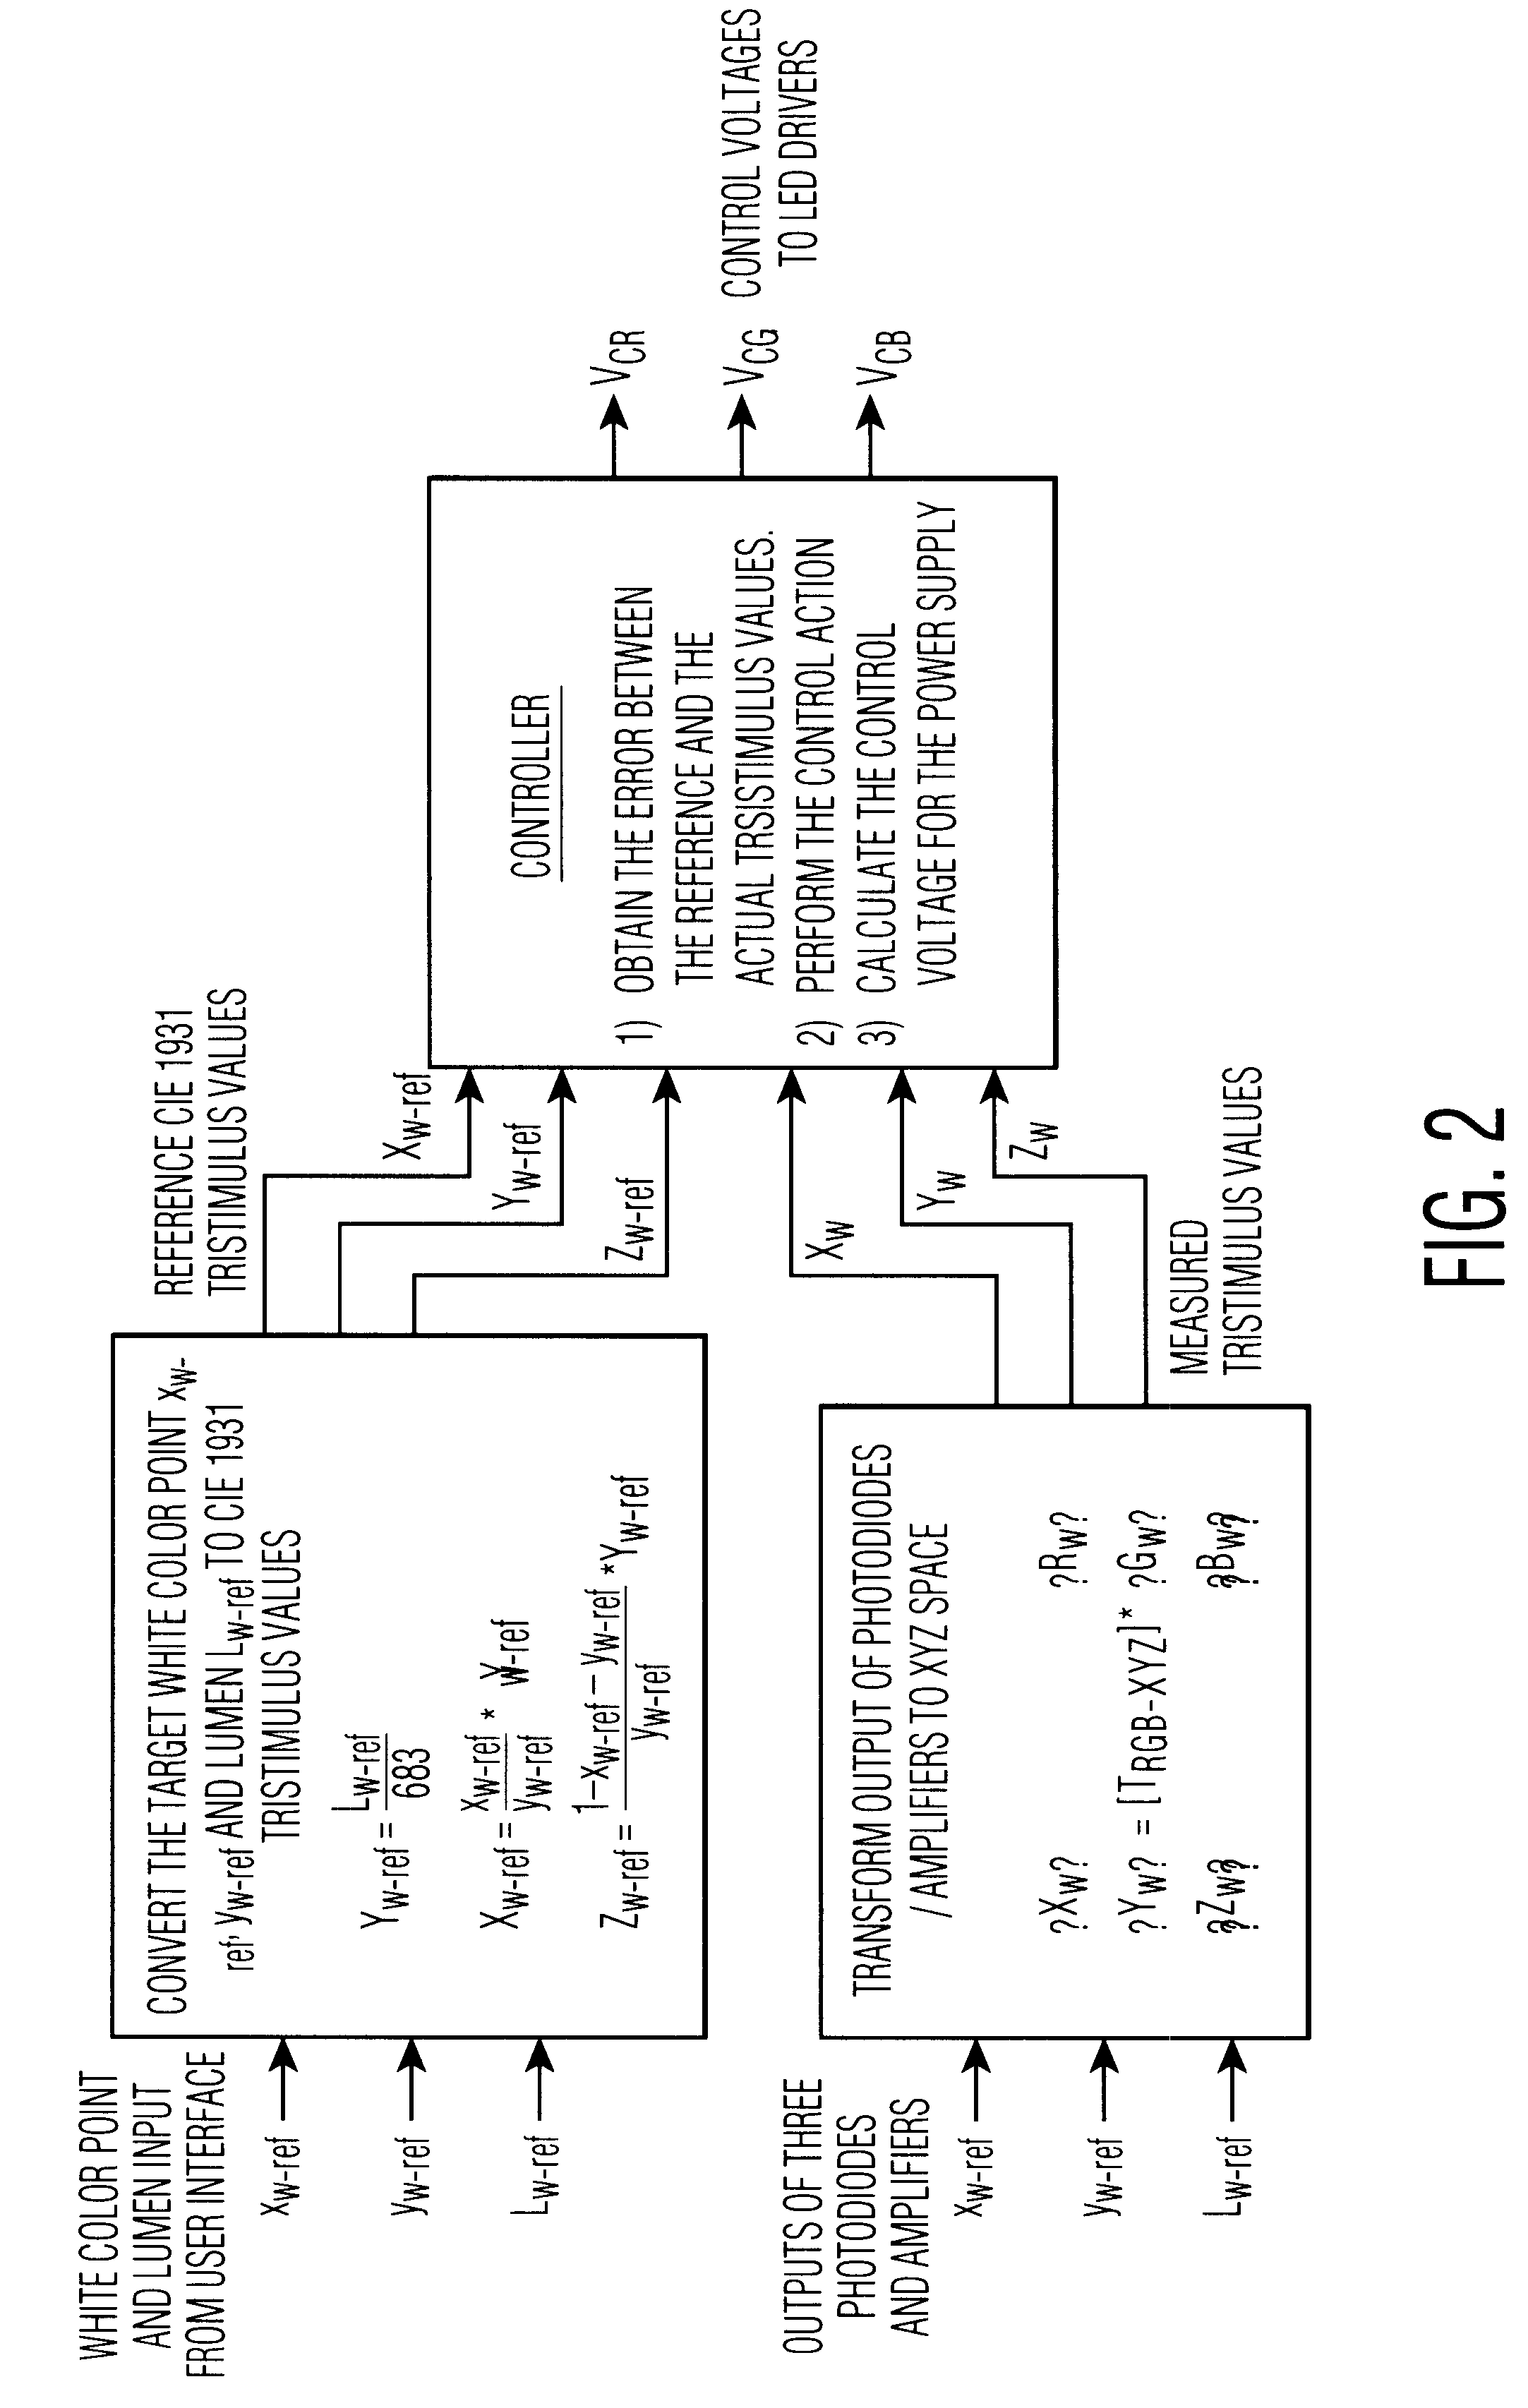 Controlling method and system for RGB based LED luminary